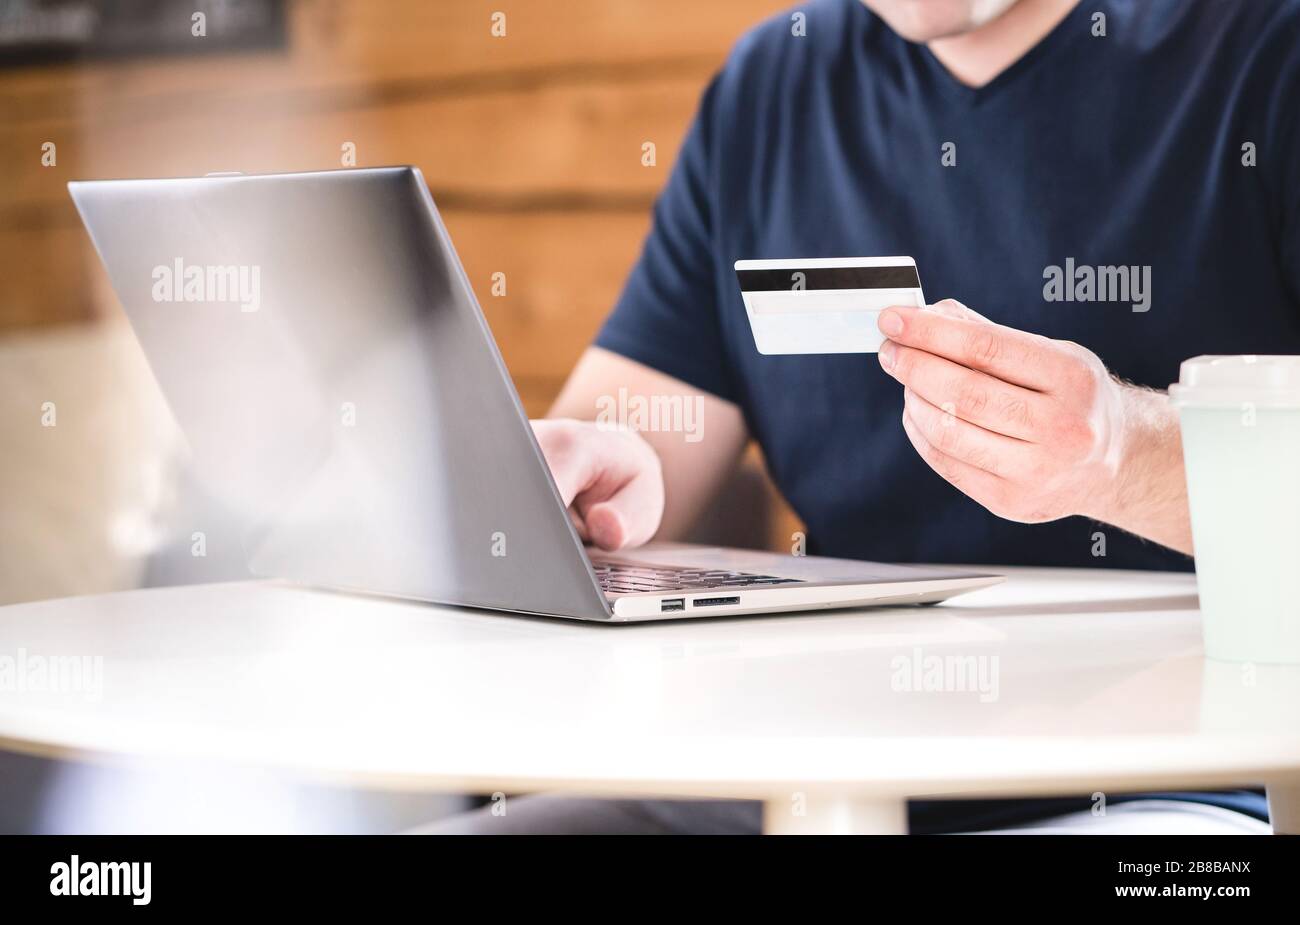 Man holding credit card and typing bank information or identification numbers with laptop. Ecommerce and online shopping concept. Stock Photo